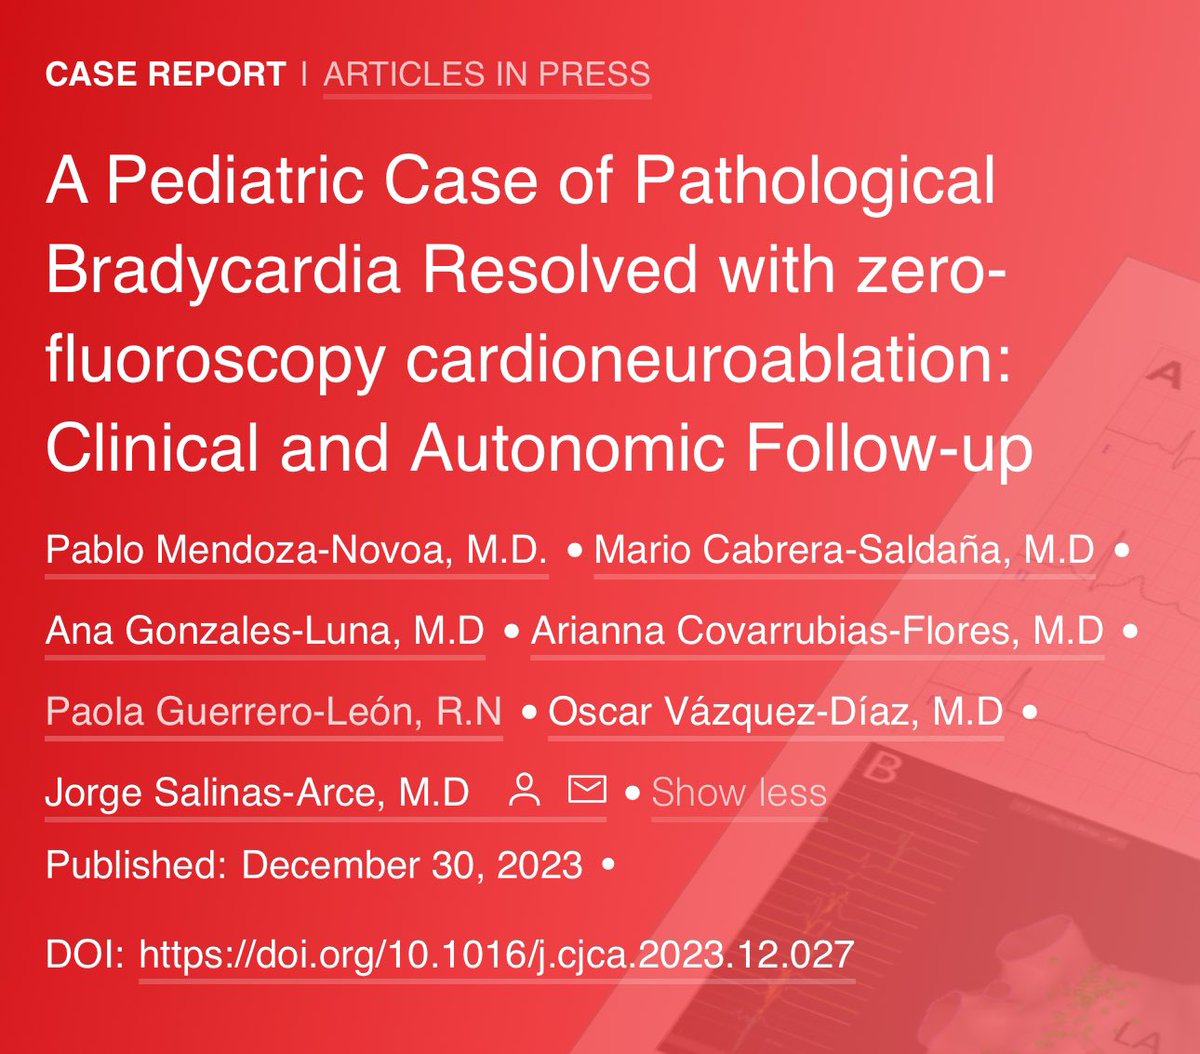 We recently published our first experience of #Cardioneuroablation in a pediatric patient. Thank you for the invitation @PabloMendoza10 @mariorcs86. #EPepps #ZeroFluoro #ICEeyes #LATAM 🇵🇪 🇲🇽

onlinecjc.ca/article/S0828-…